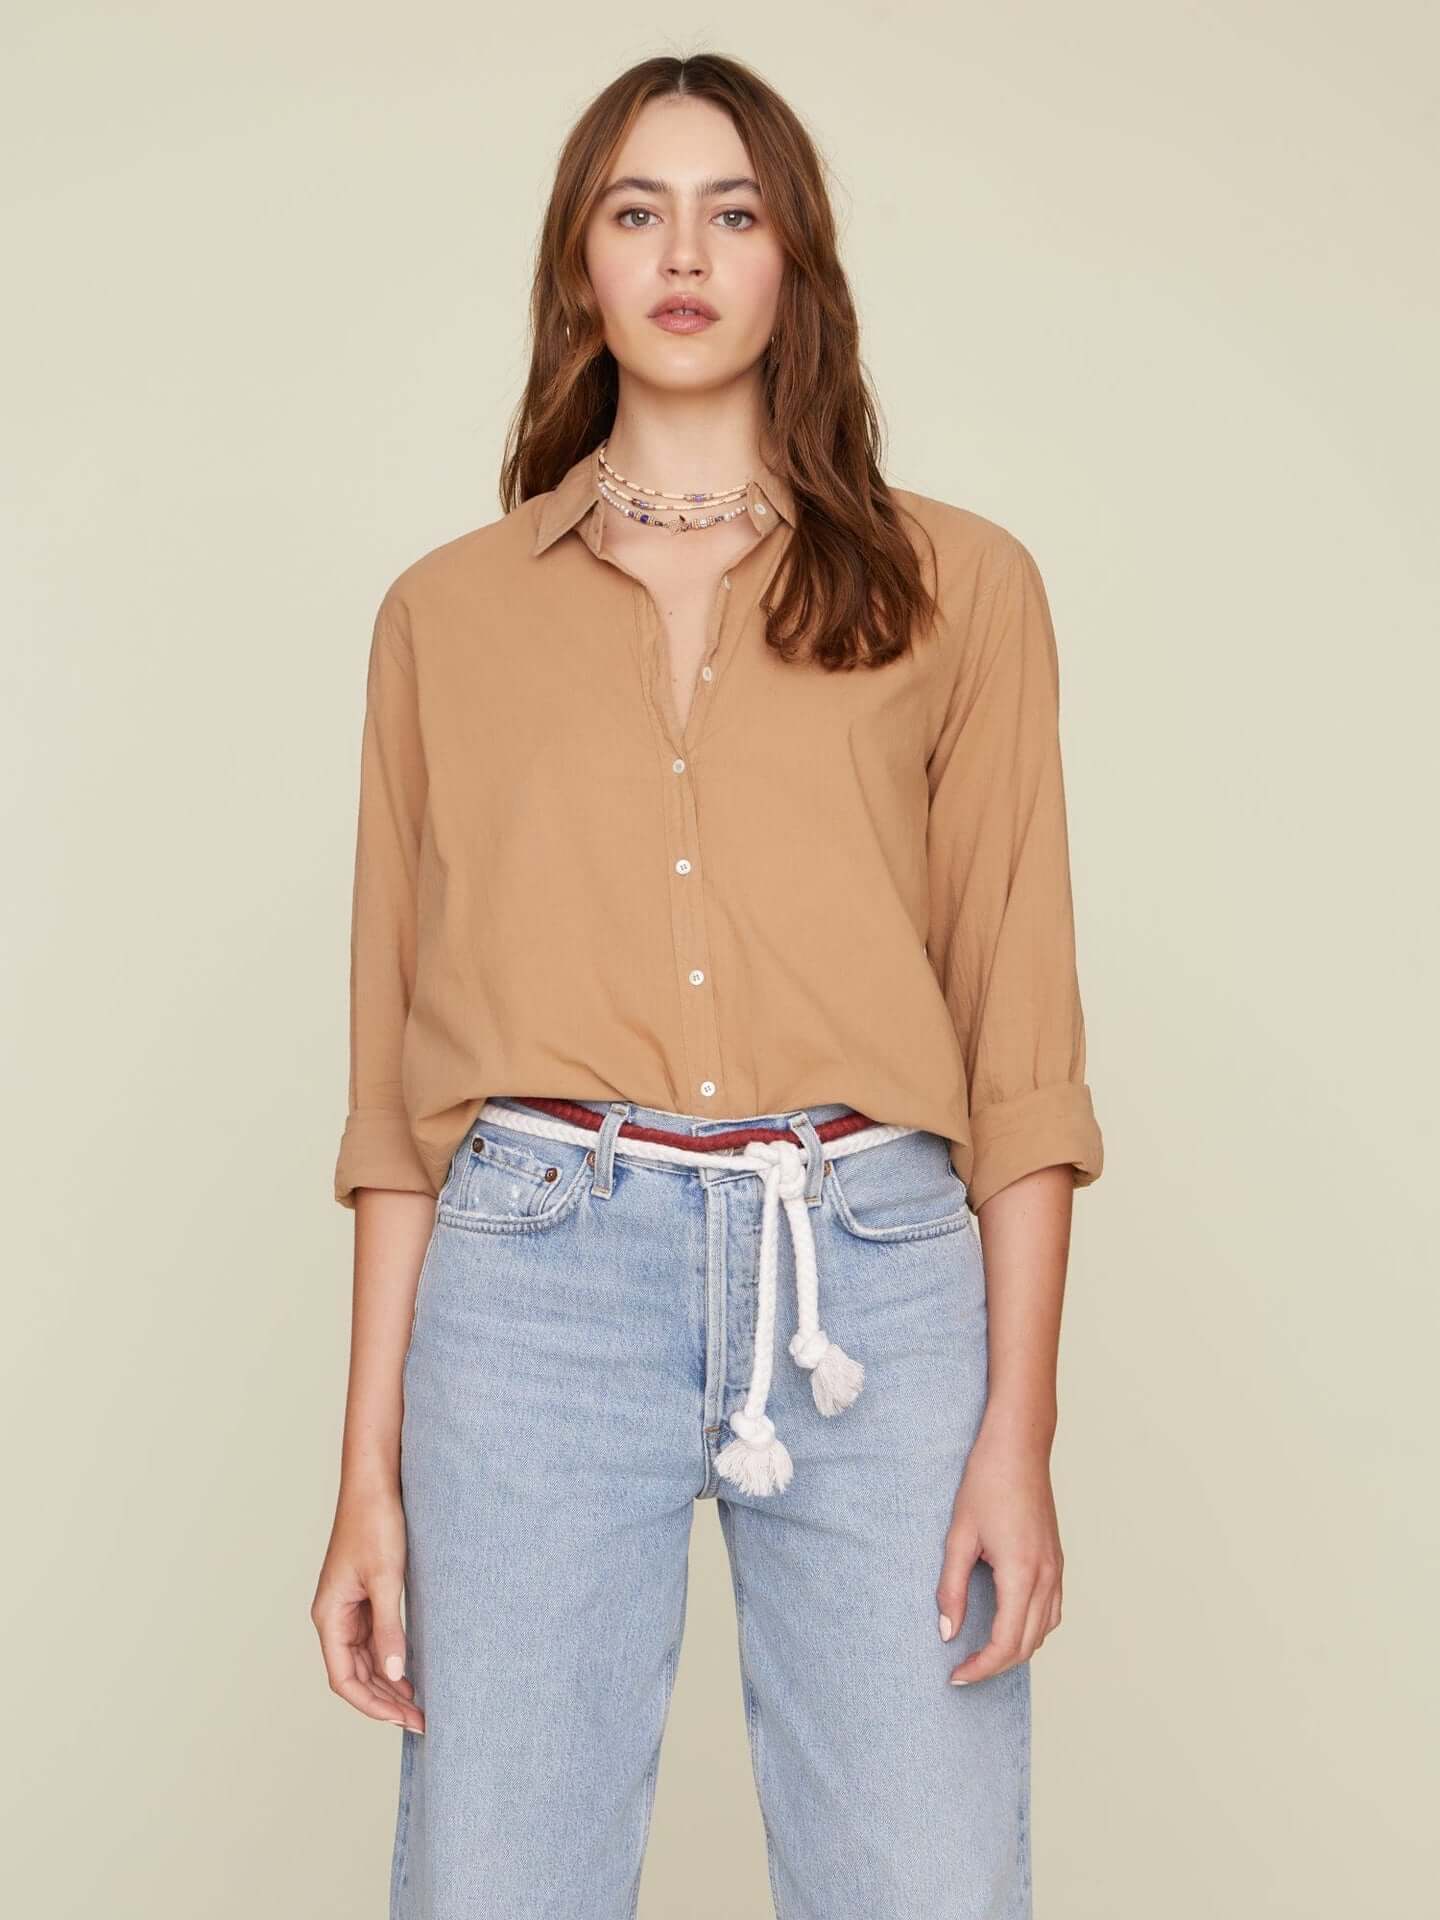 Xírena Beau Shirt in Hazelnut available at TNT The New Trend Australia. Free shipping on orders over $300 AUD.